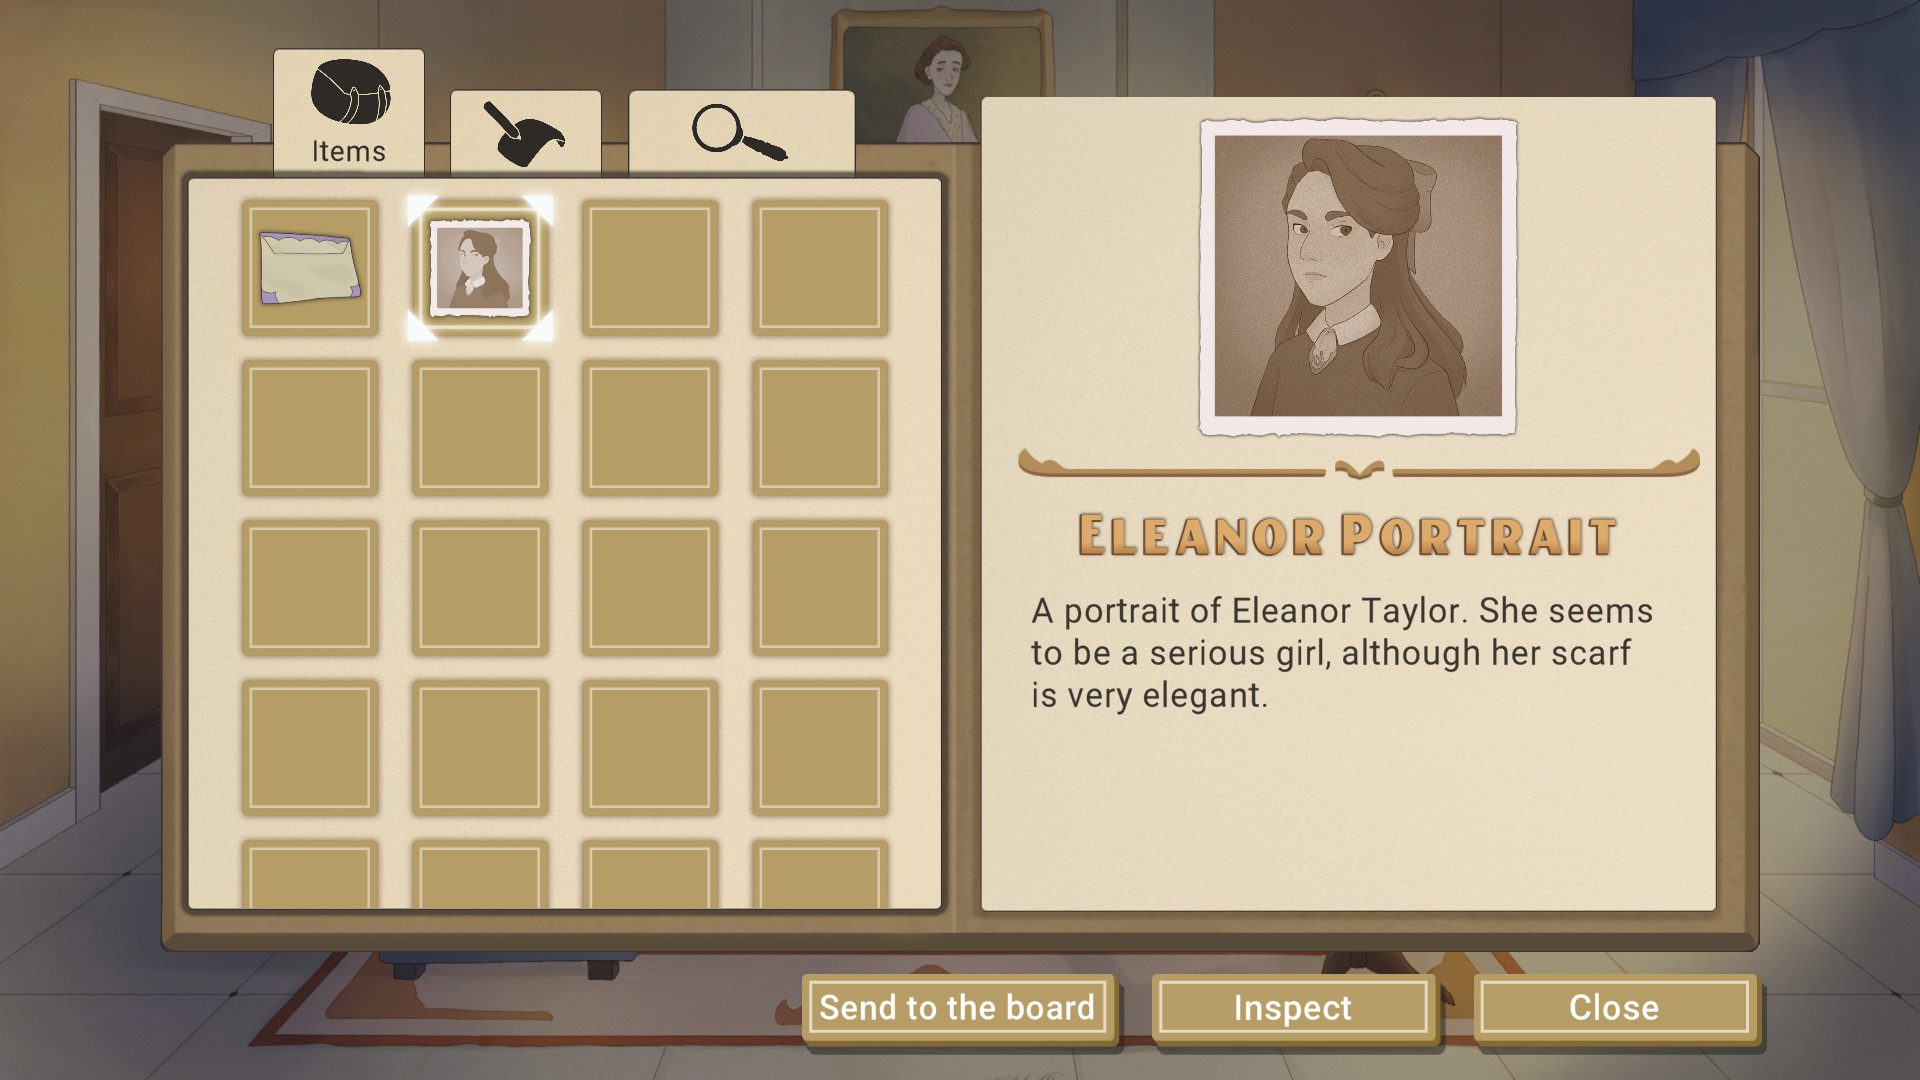 The casebook open showing items with a portrait of a young woman in Marlon's Mystery